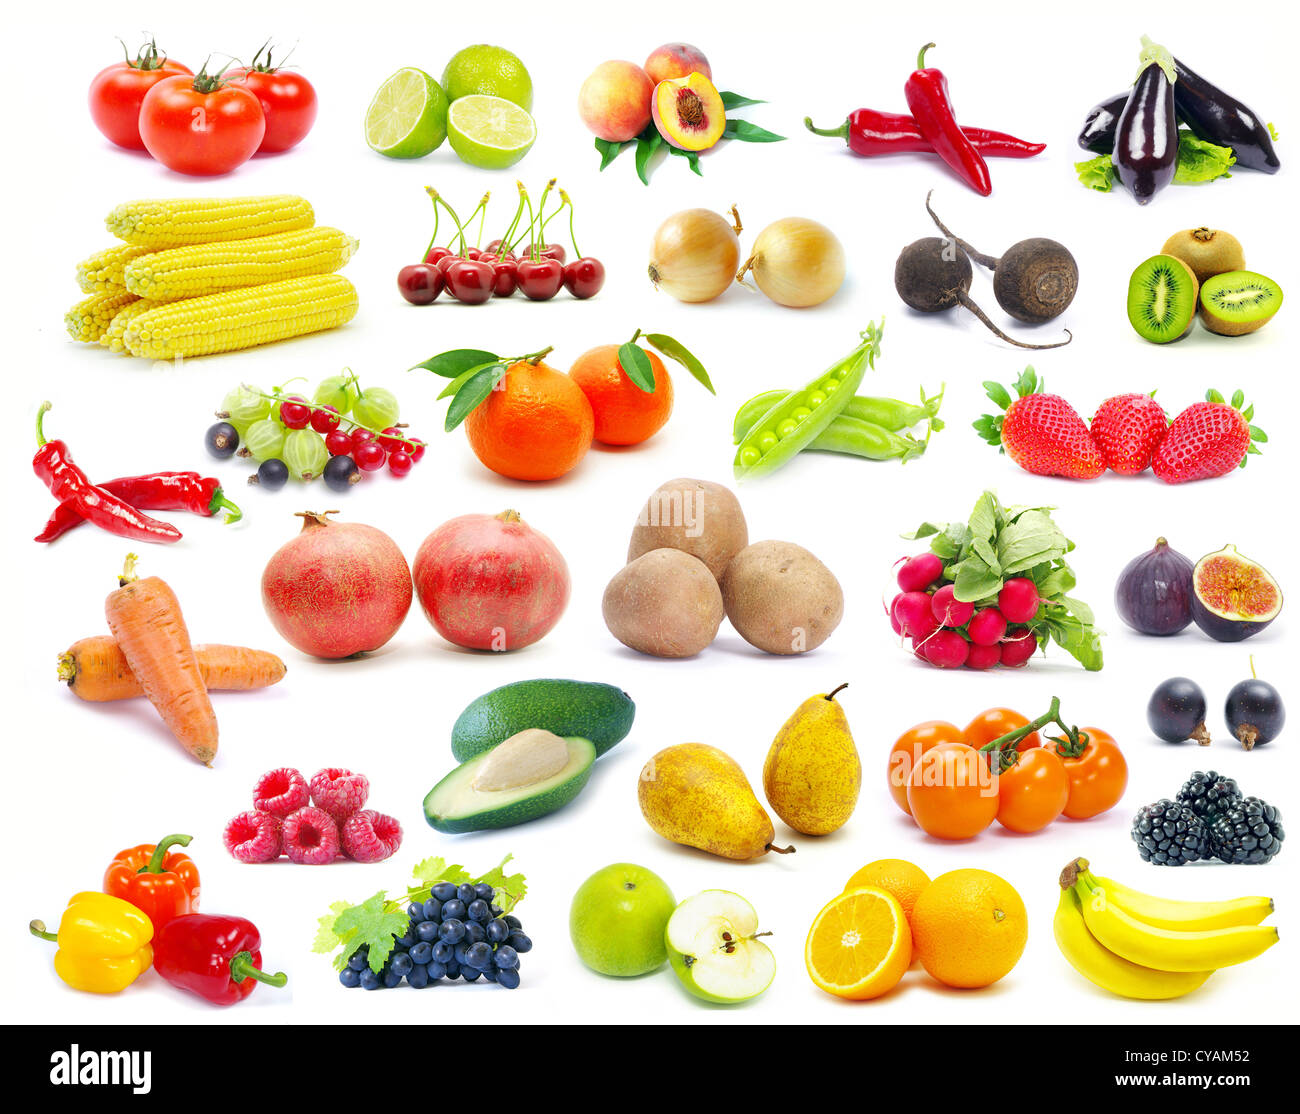 fruits and vegetable isolated on white background Stock Photo